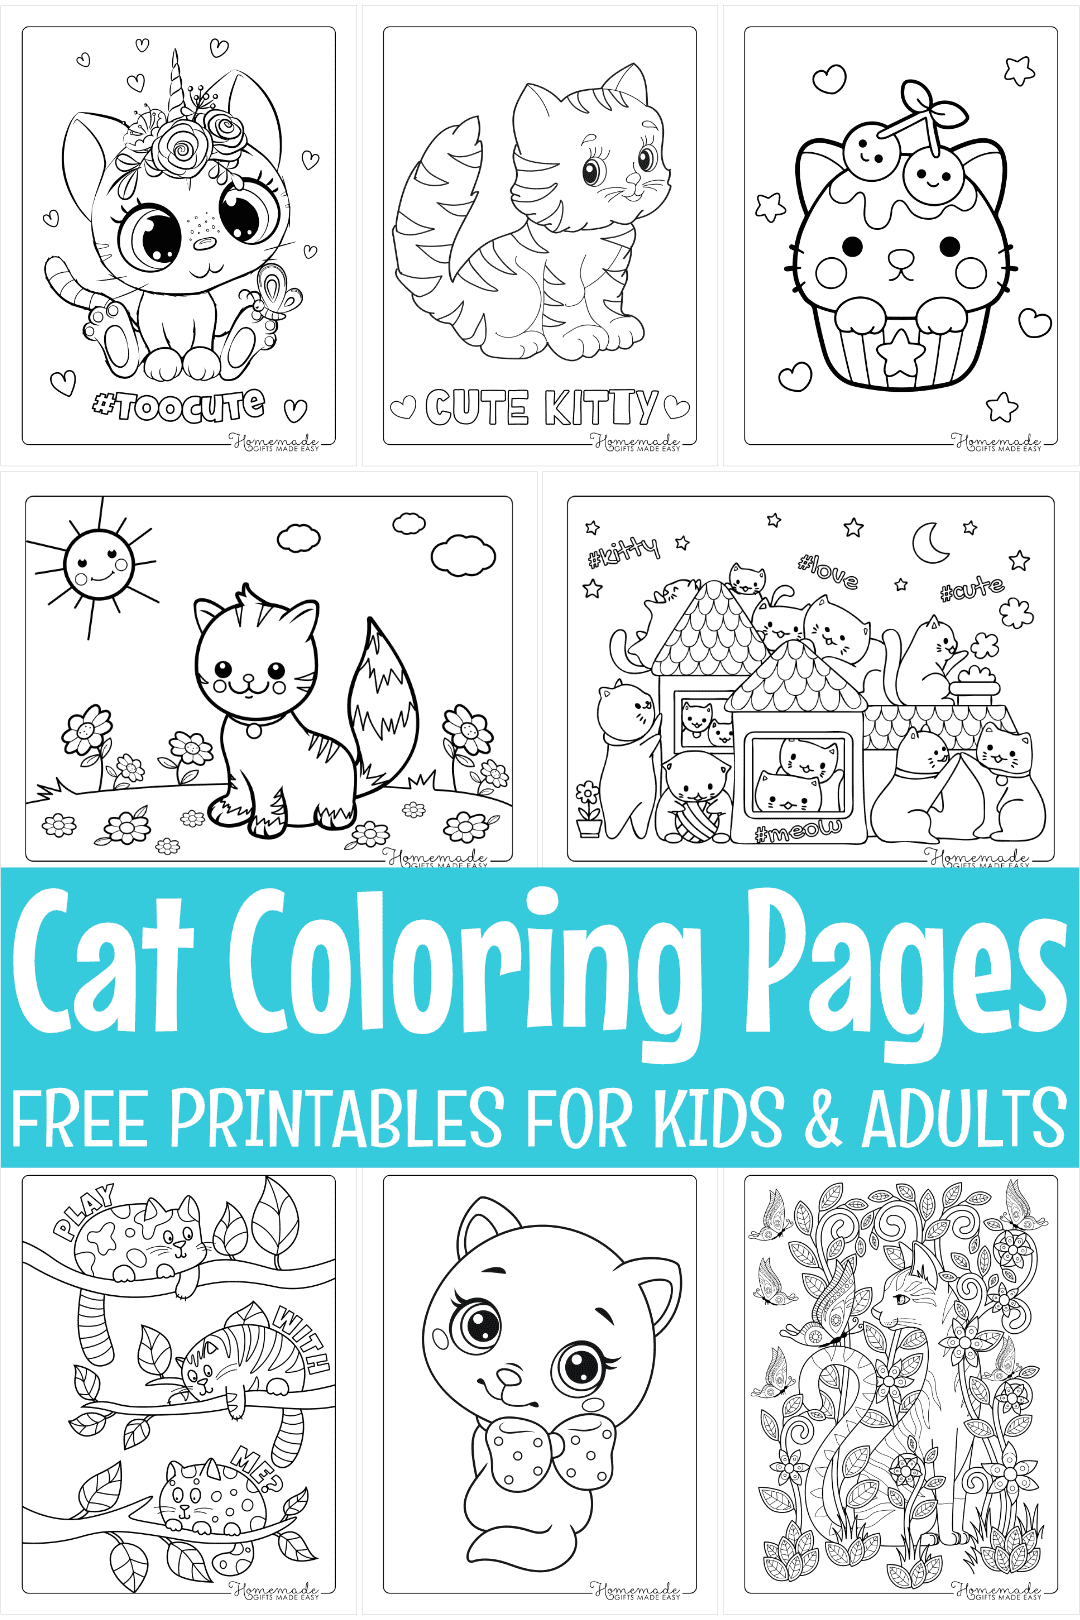 Hello Kitty Coloring Book : 100 Pages Coloring Book For Kids